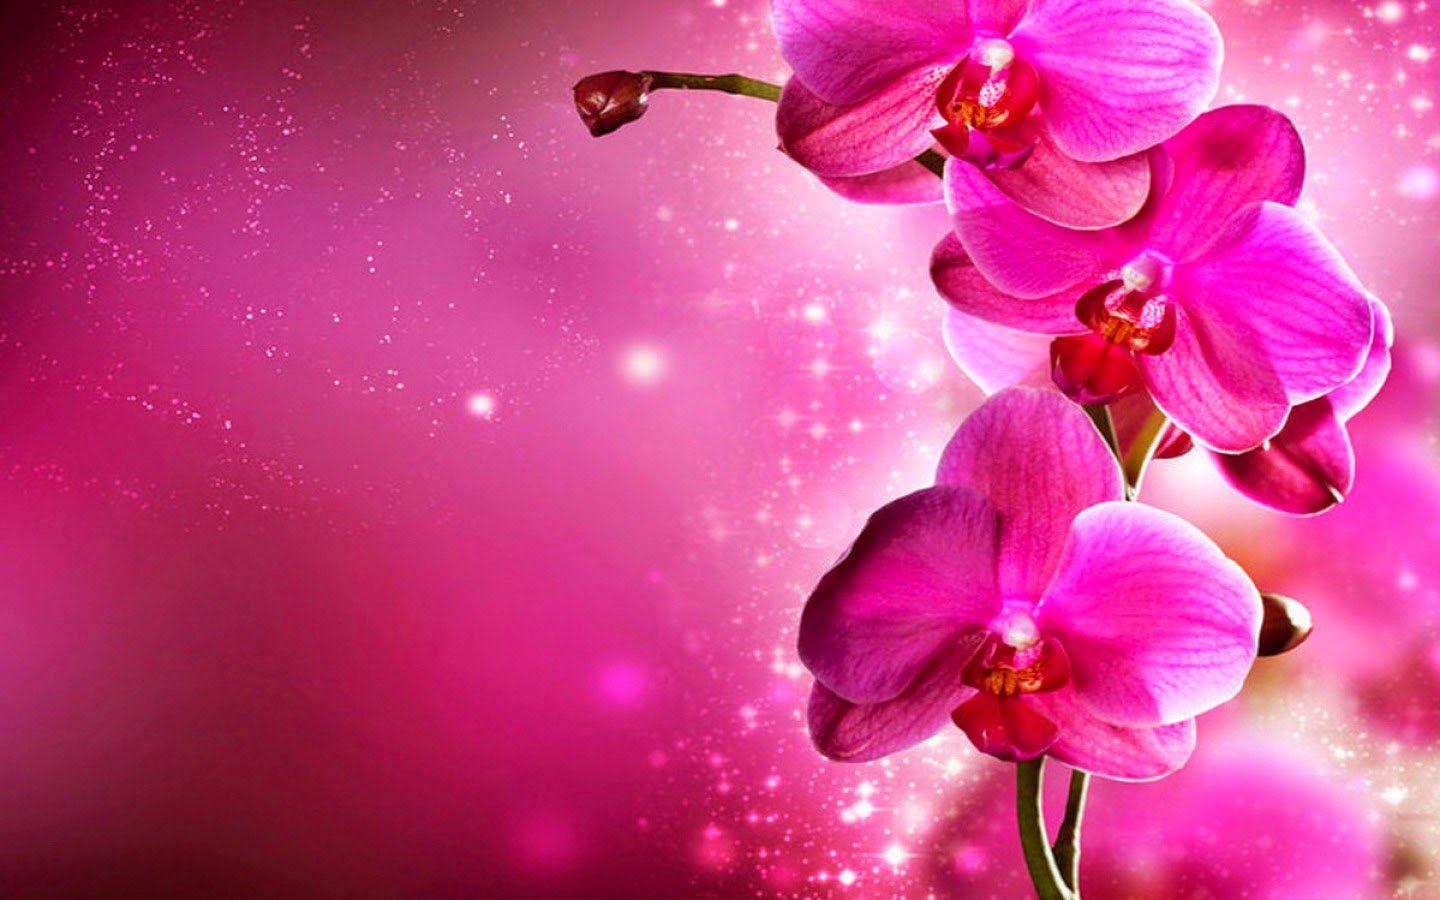 Pink Orchids Flowers Image HD Wallpaper free Download. HD